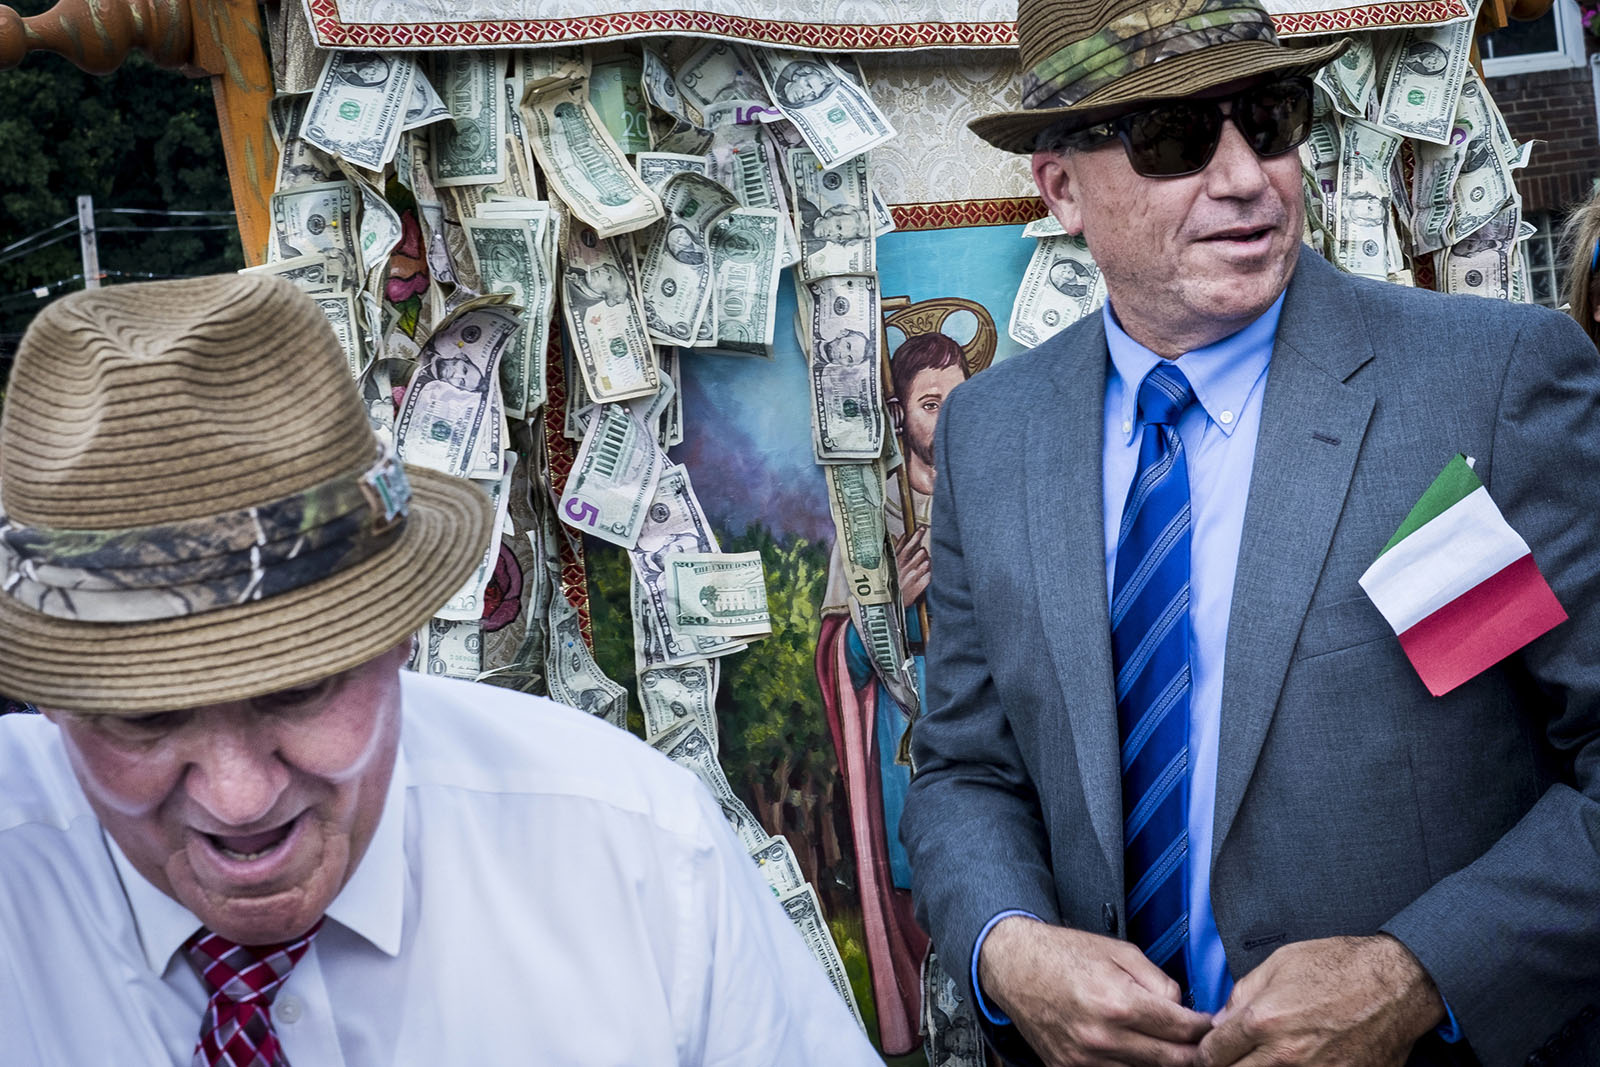 Two men, one with an Italian flag, stand by a wall of multi-valued bills.